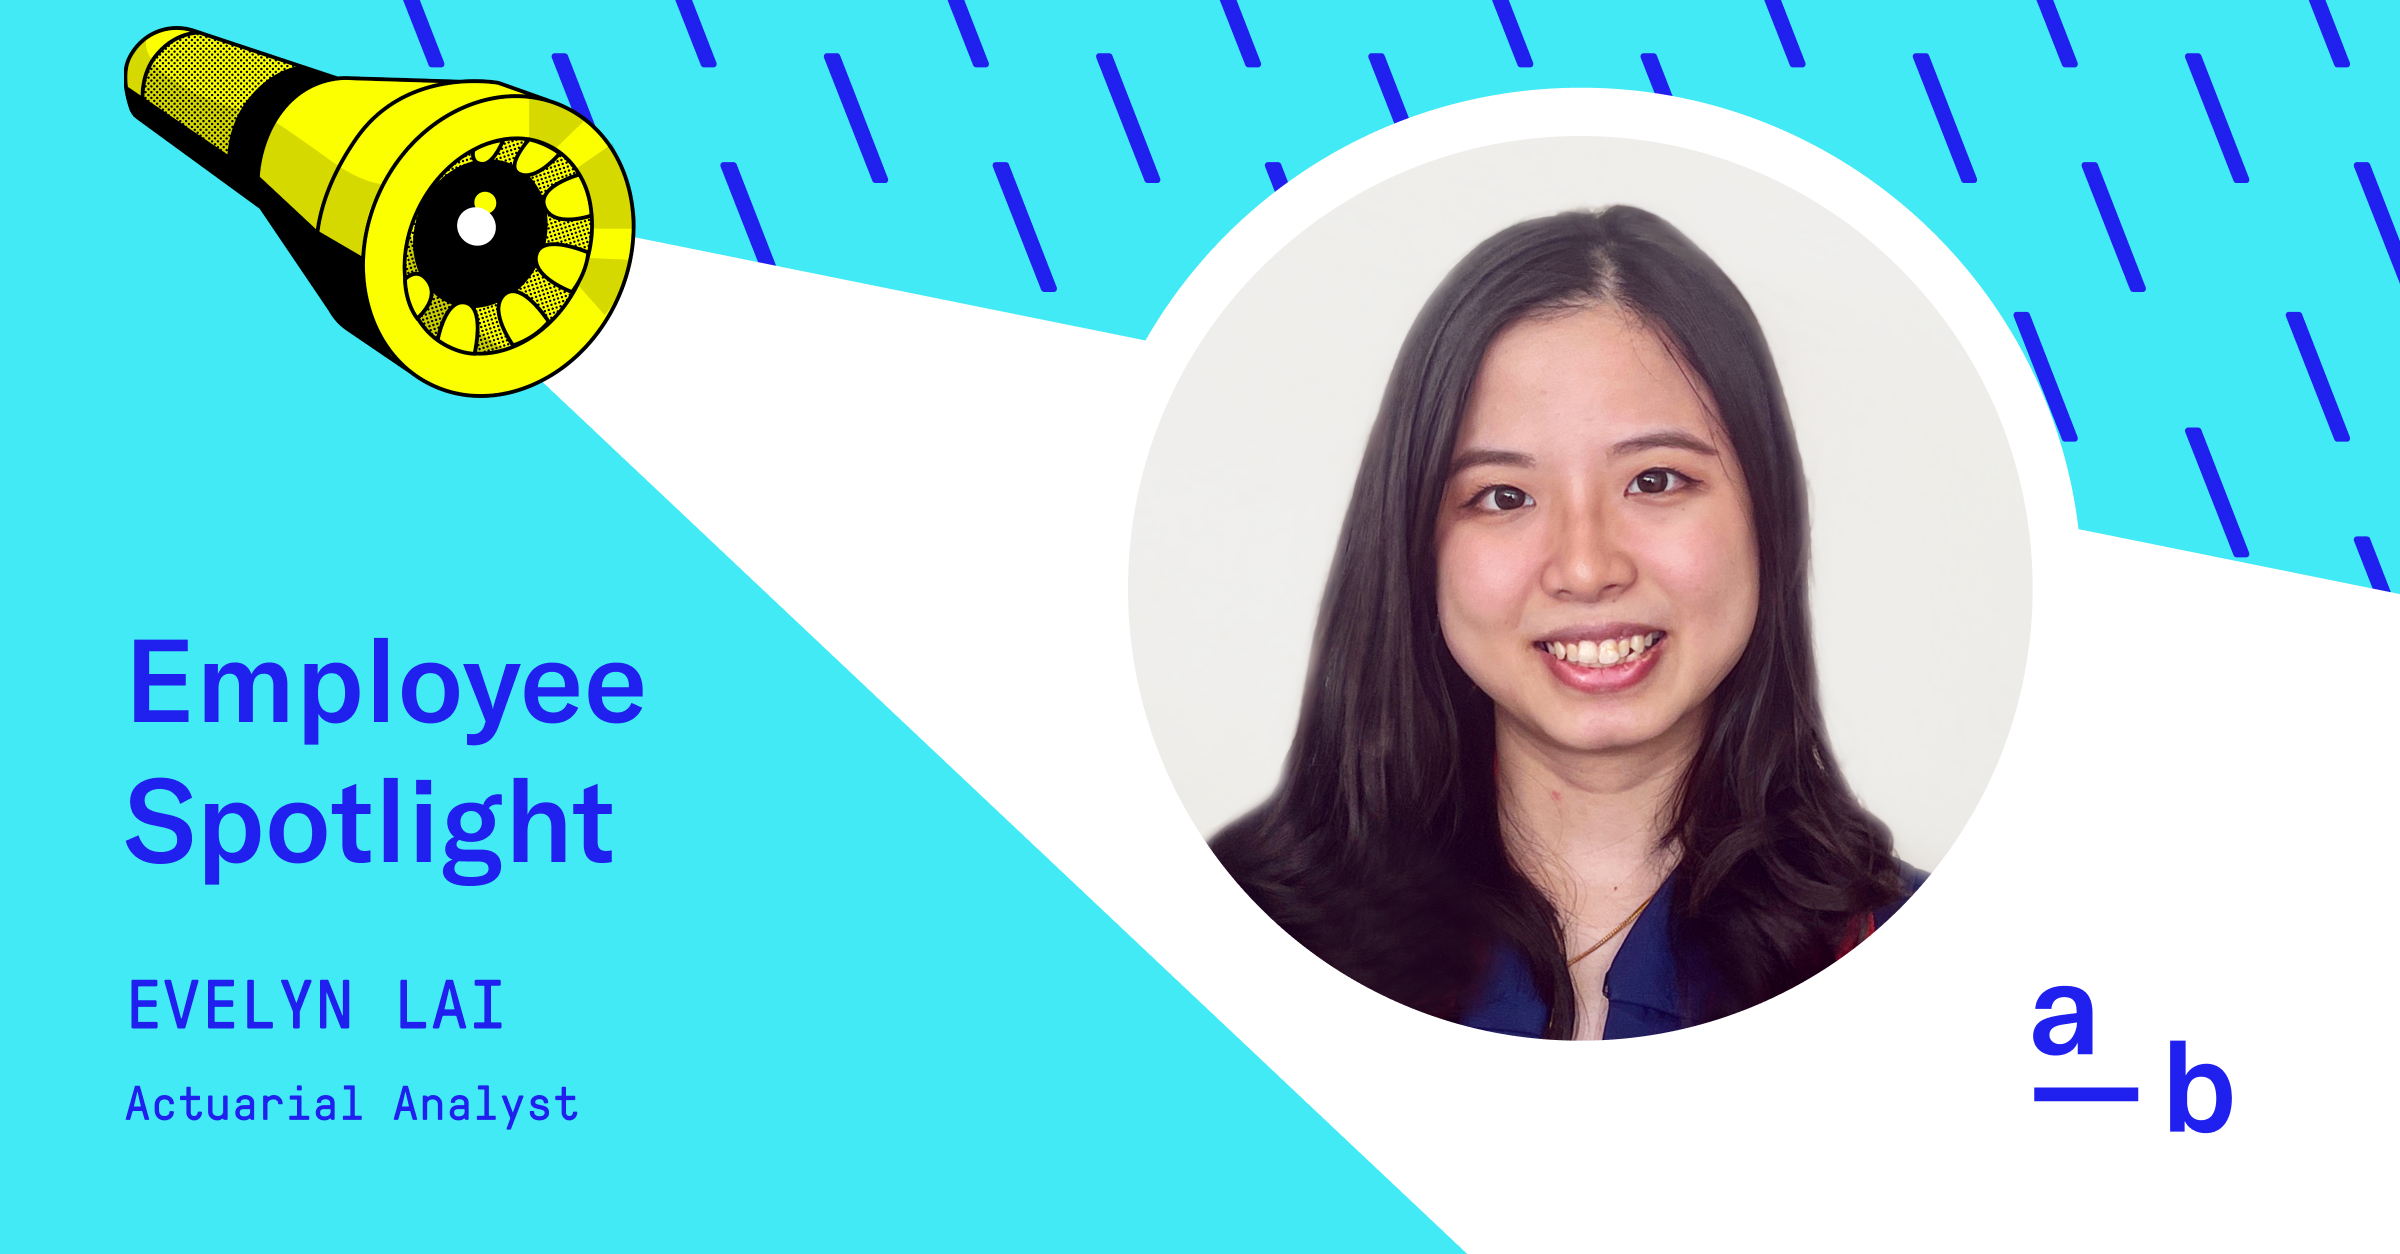 Meet Evelyn Lai, Actuarial Analyst